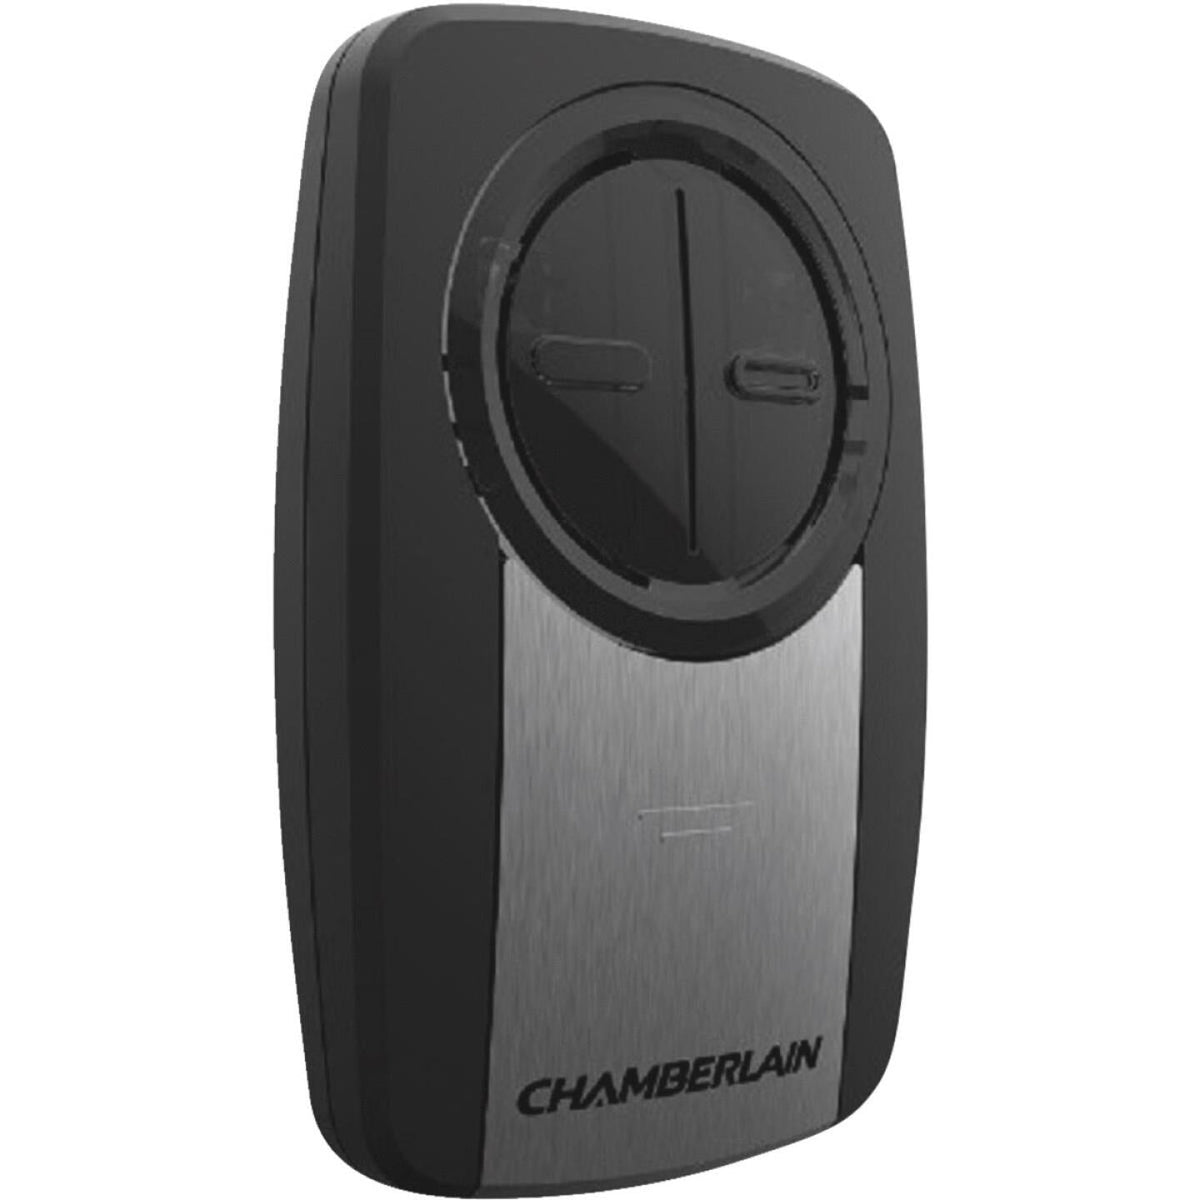 Chamberlain Original Clicker 2-Button Stainless Steel Universal Garage Door Remote  Control In Pecos, TX Gibson's Hardware and Lumber